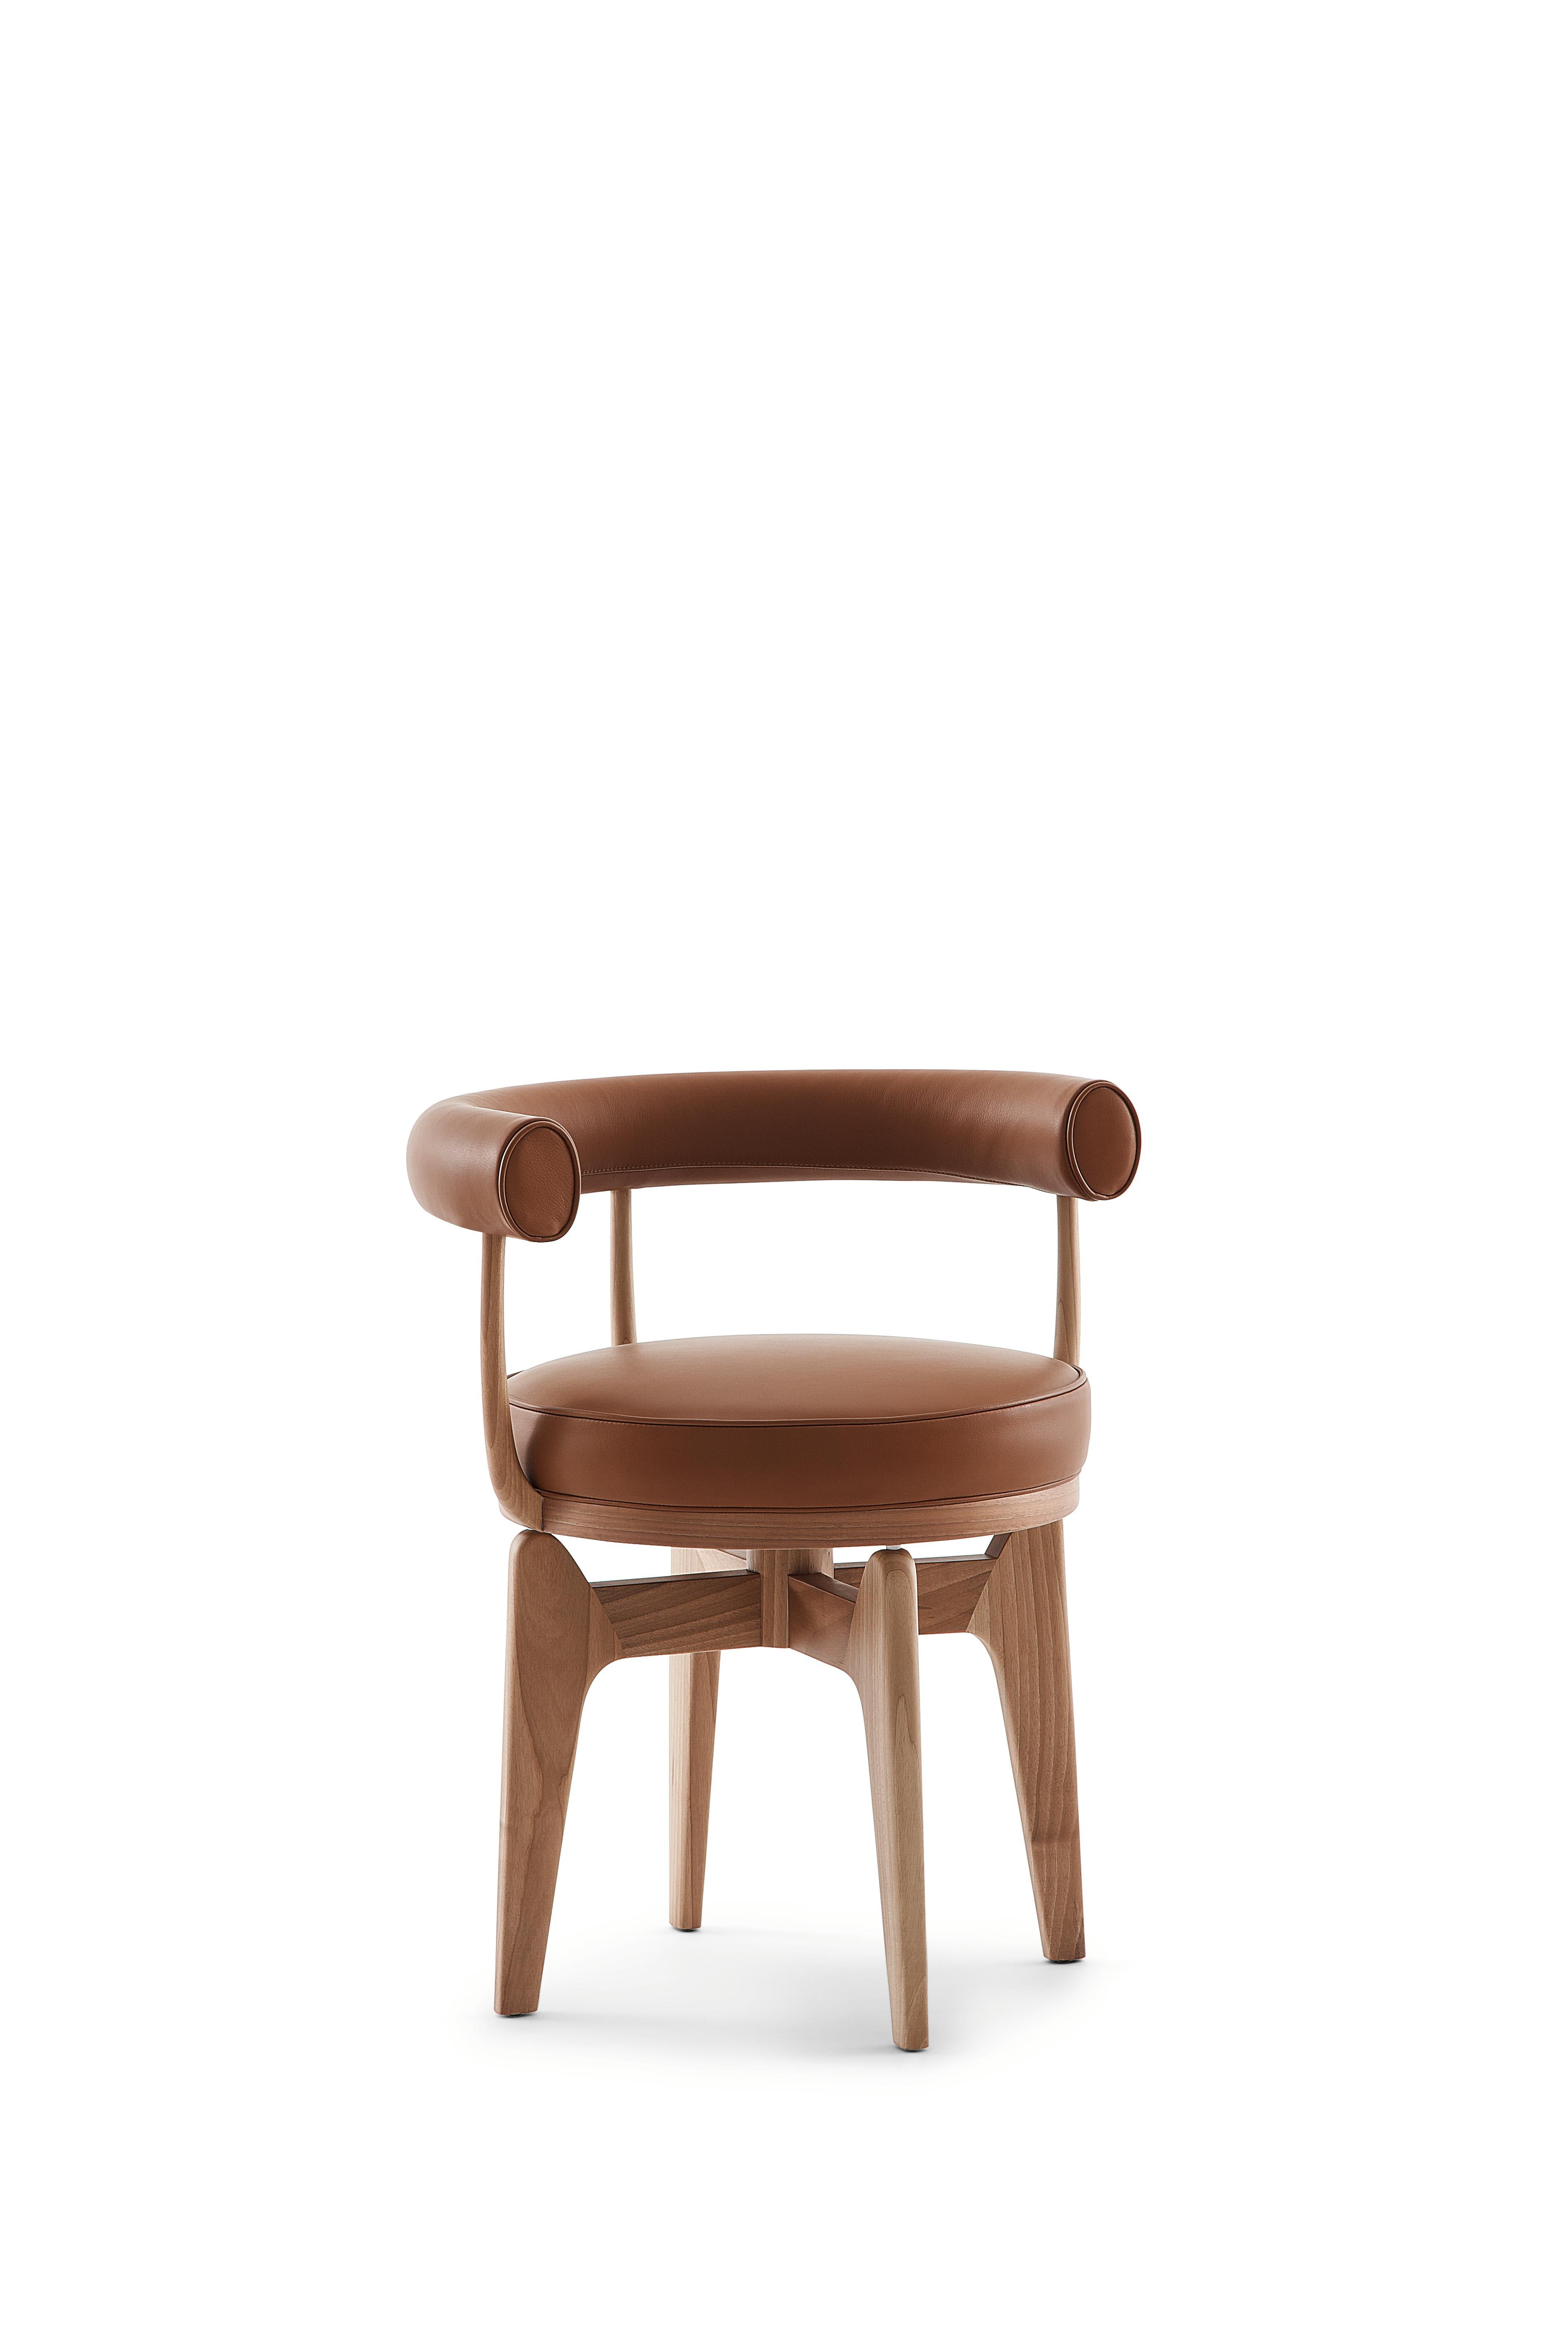 Mid-Century Modern Charlotte Perriand Fauteuil Indochine  en vente